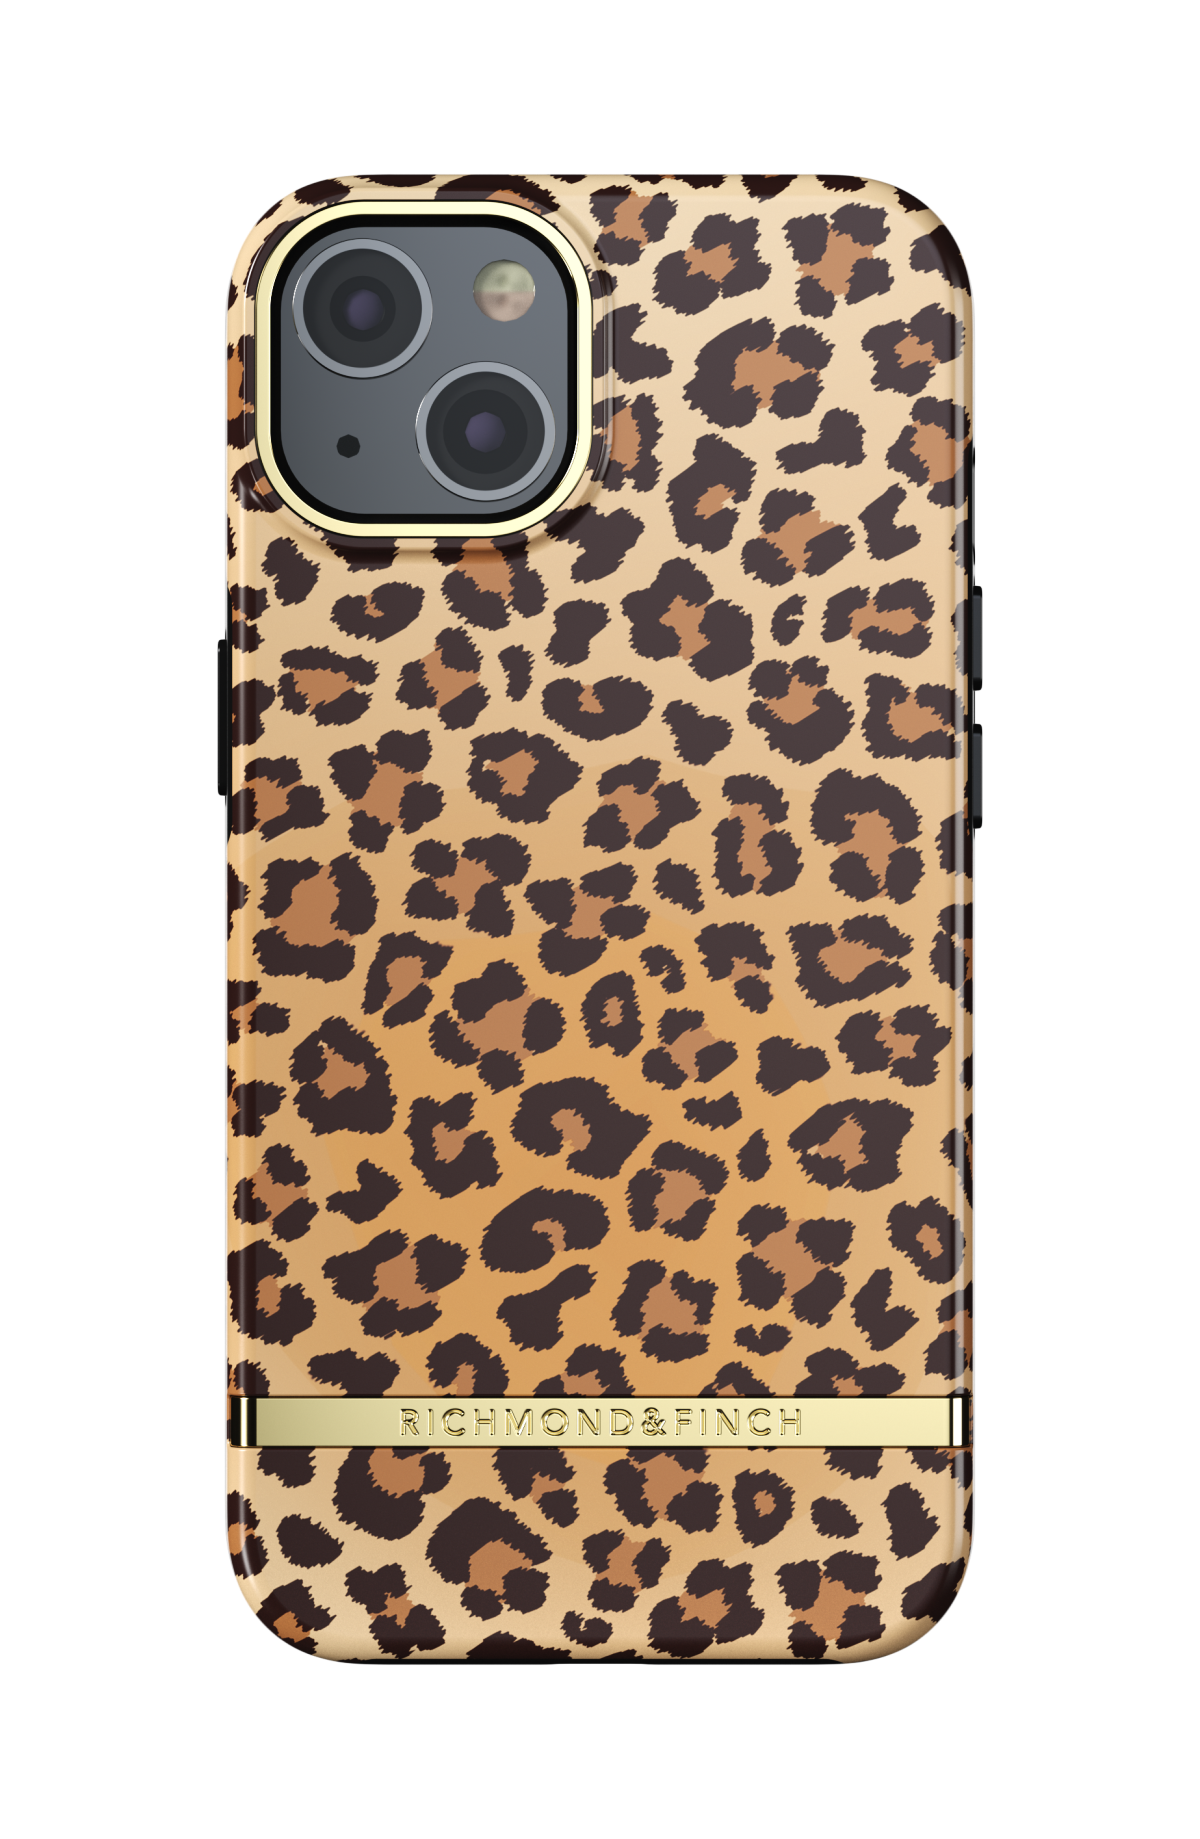 RICHMOND & iPhone Backcover, IPHONE APPLE, Leopard YELLOW 13, 13, FINCH Soft